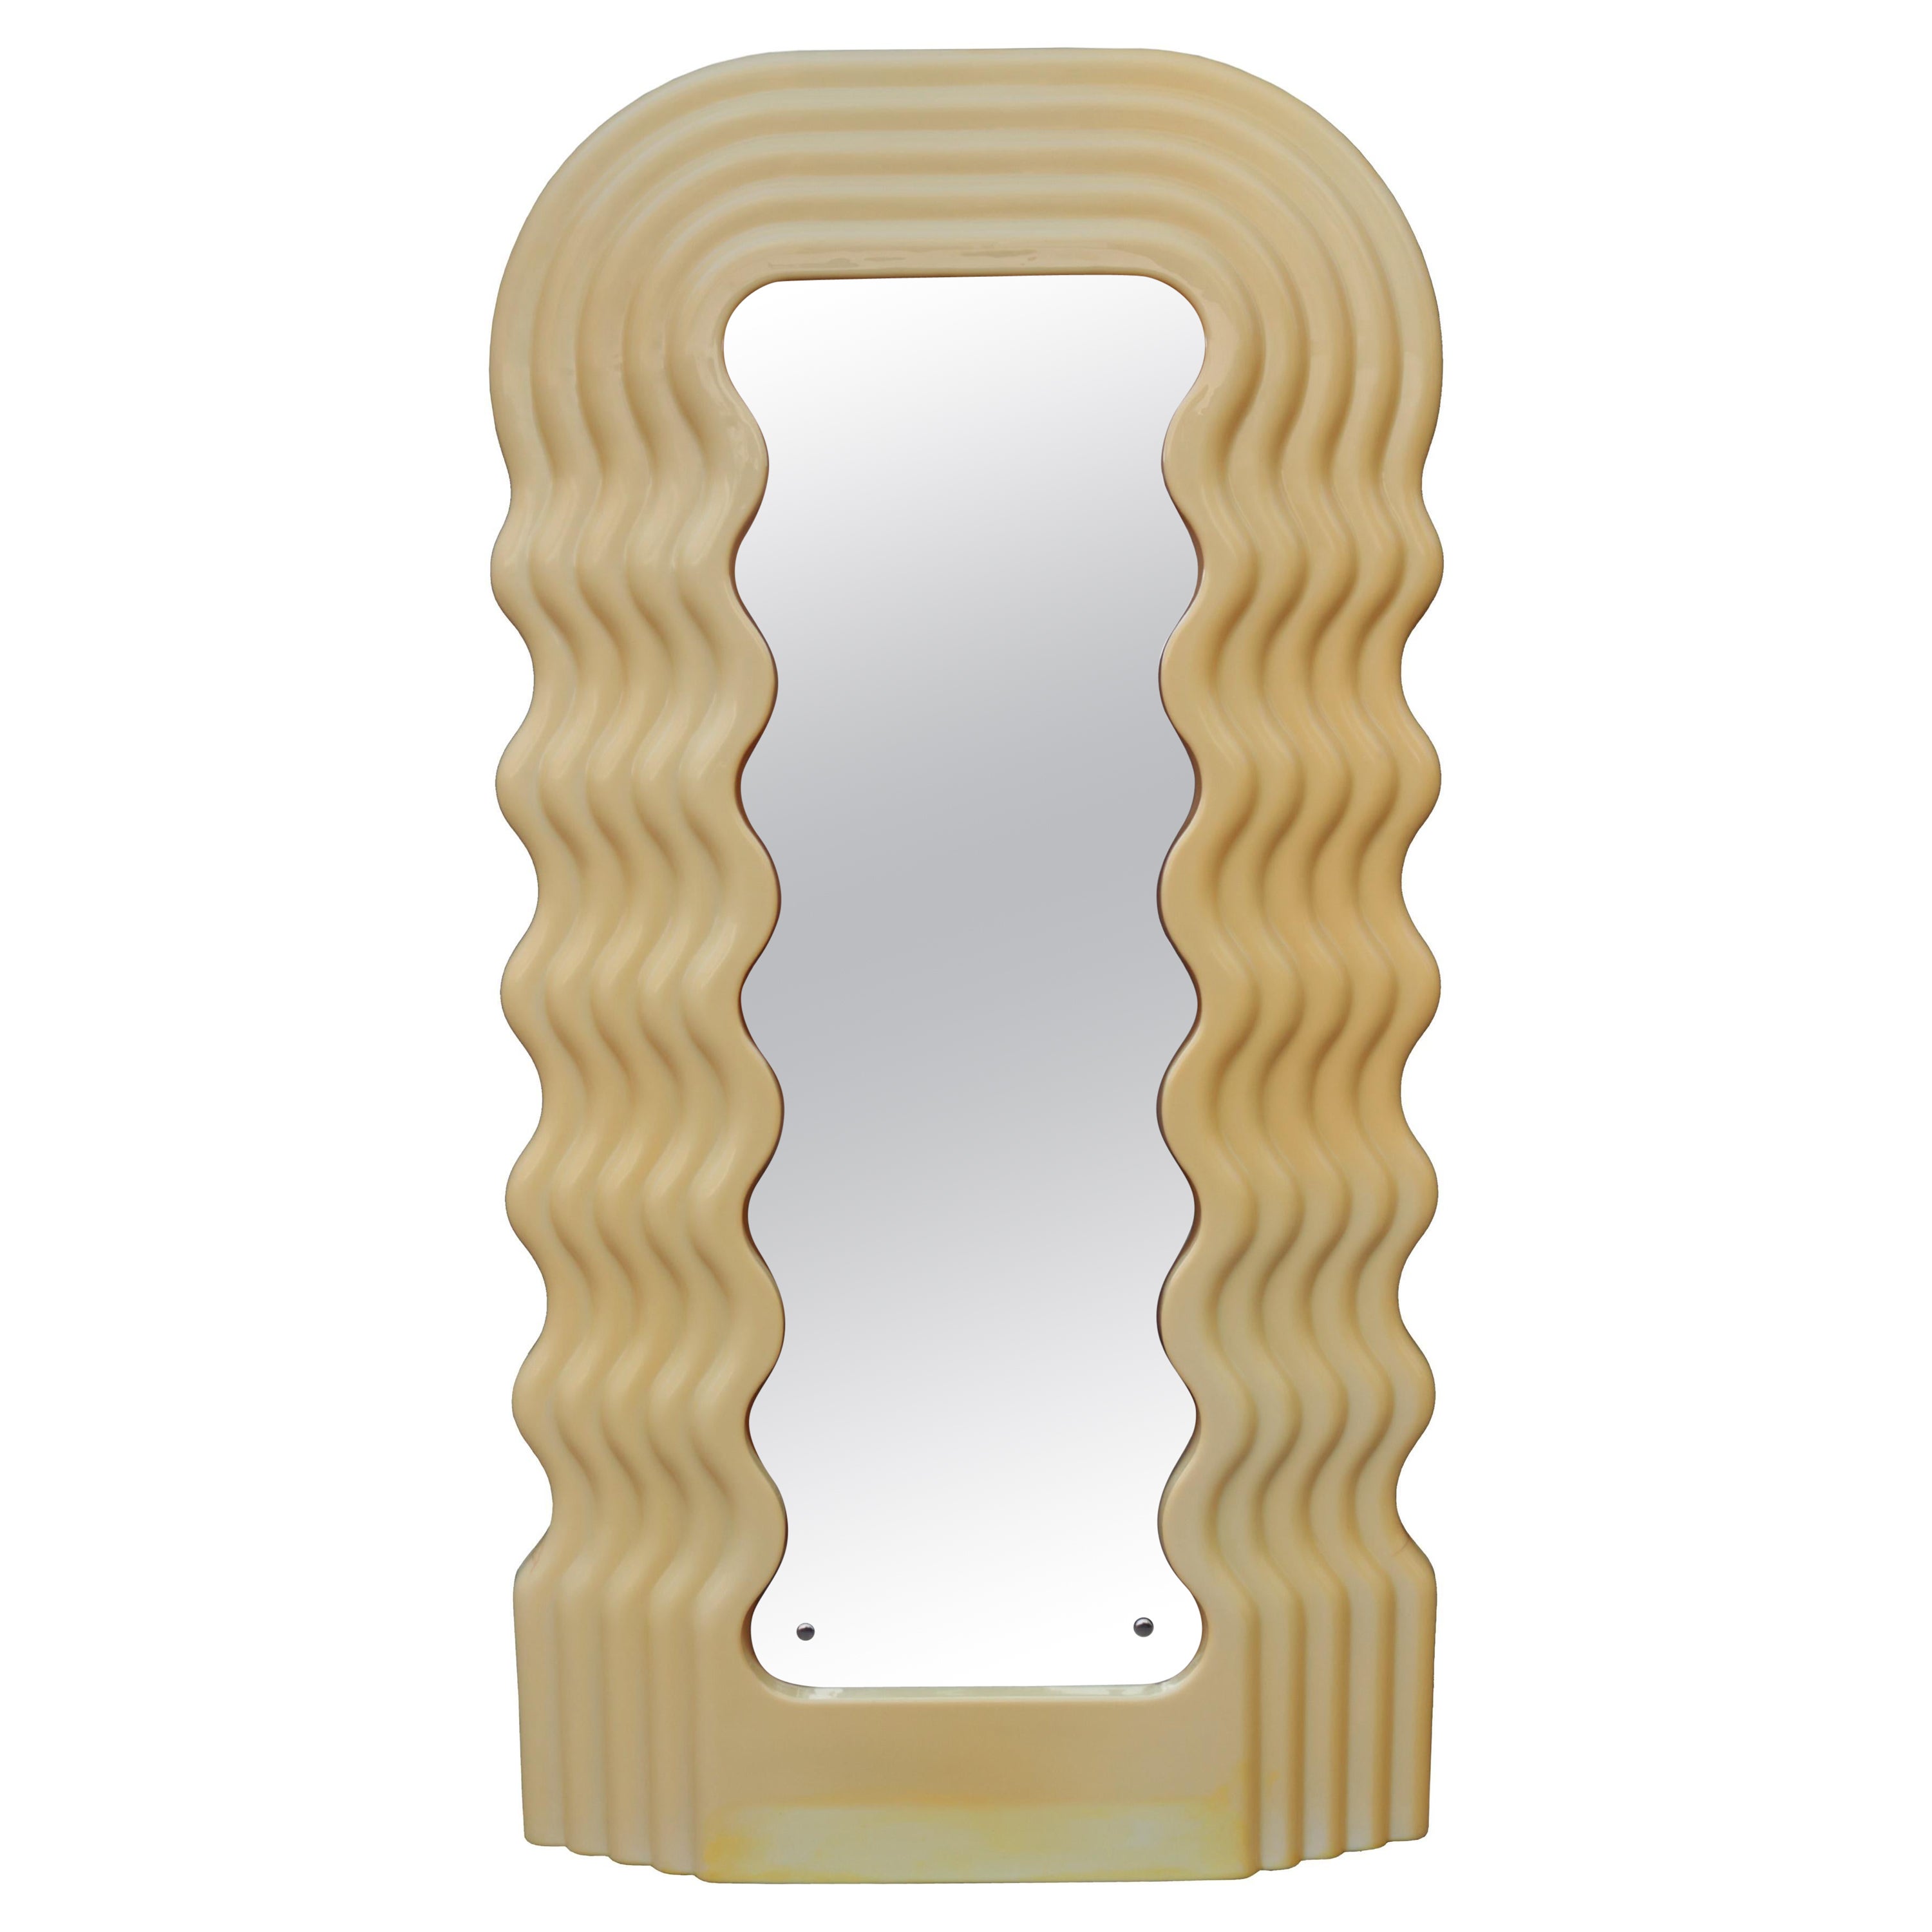 Ultrafragola Mirror Designed by Ettore Sottsass for Poltronova, Italy 1970s For Sale